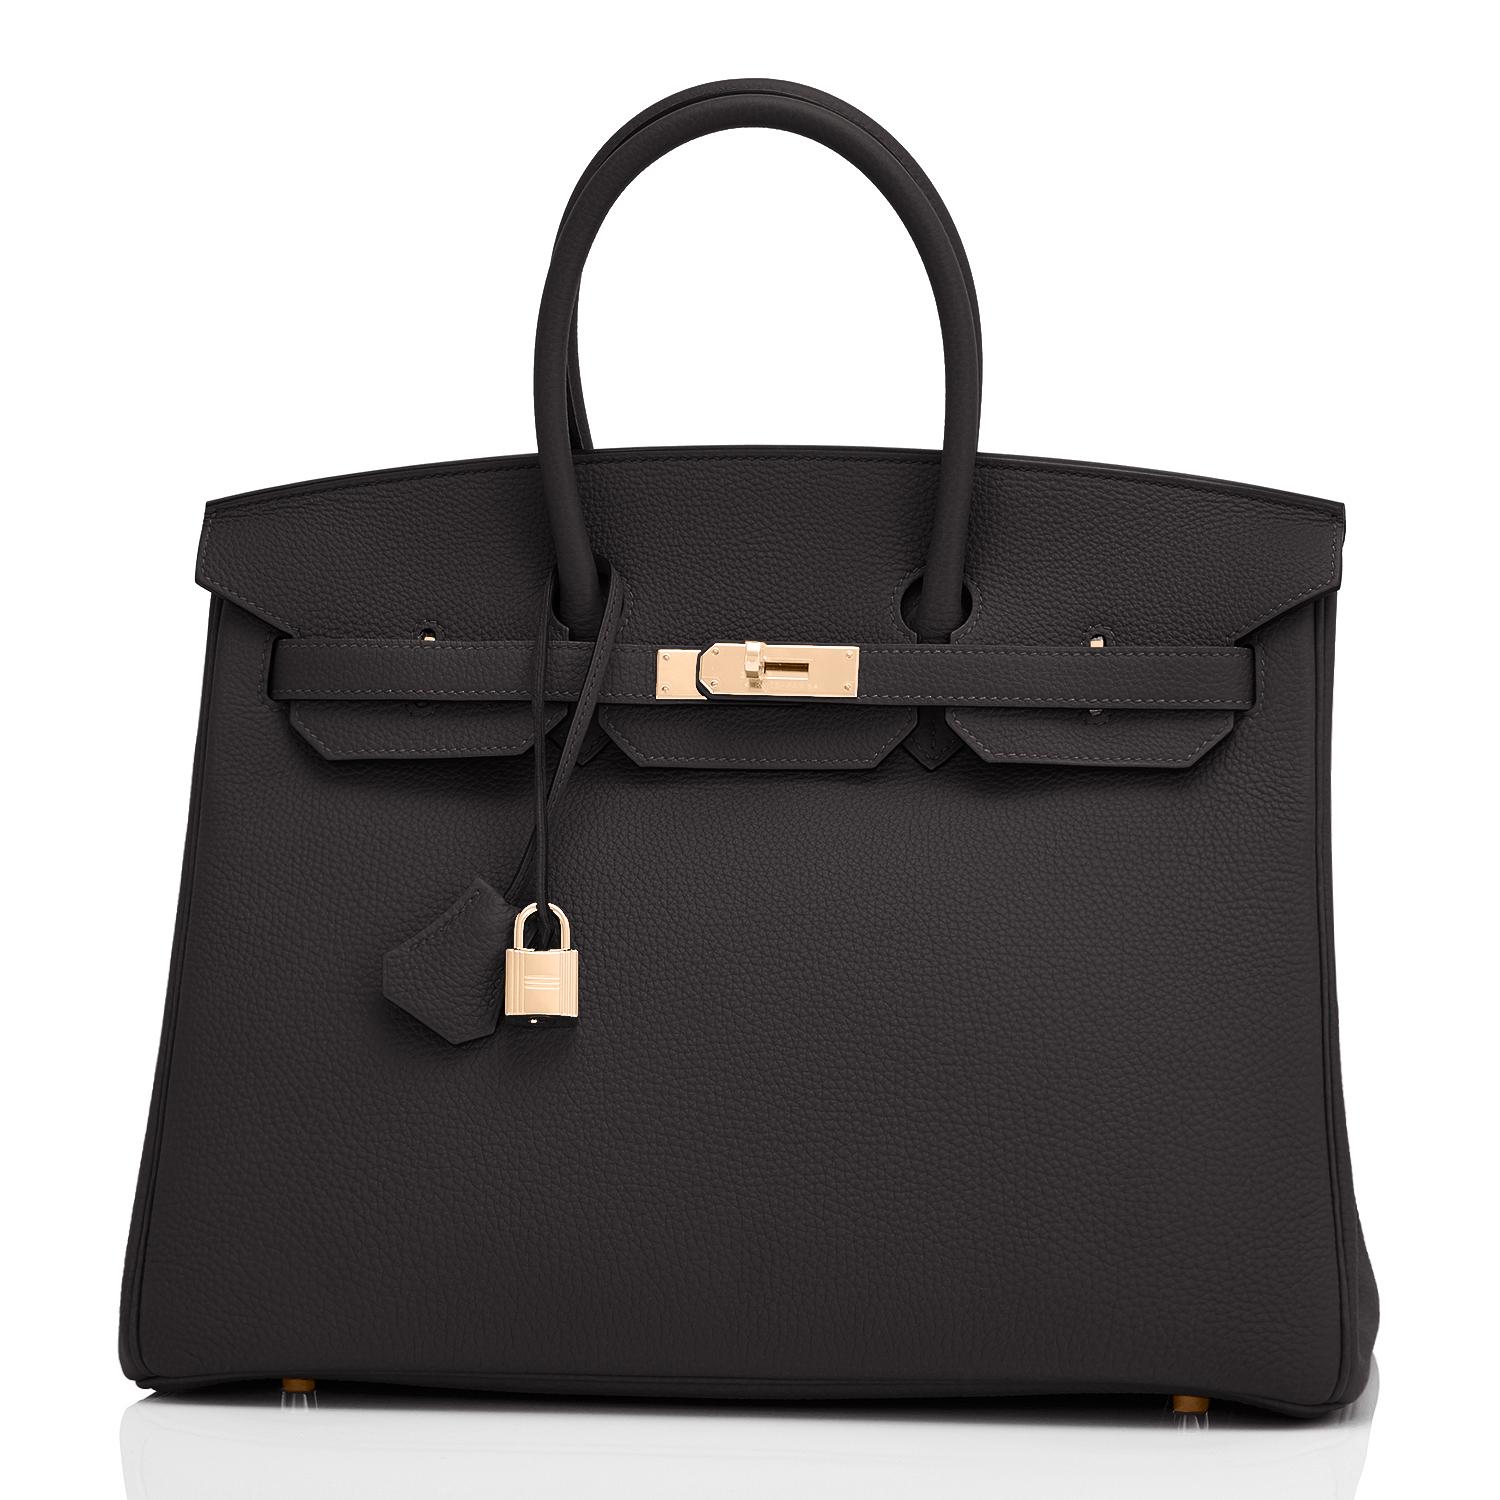 Hermes Black Togo 35cm Birkin Rose Gold Hardware Power Birkin Z Stamp 2021
Just purchased from Hermes store; bag bears new 2021 interior Z stamp.
Brand New in Box. Store fresh. Pristine Condition (with plastic on hardware). 
Perfect gift! Comes with